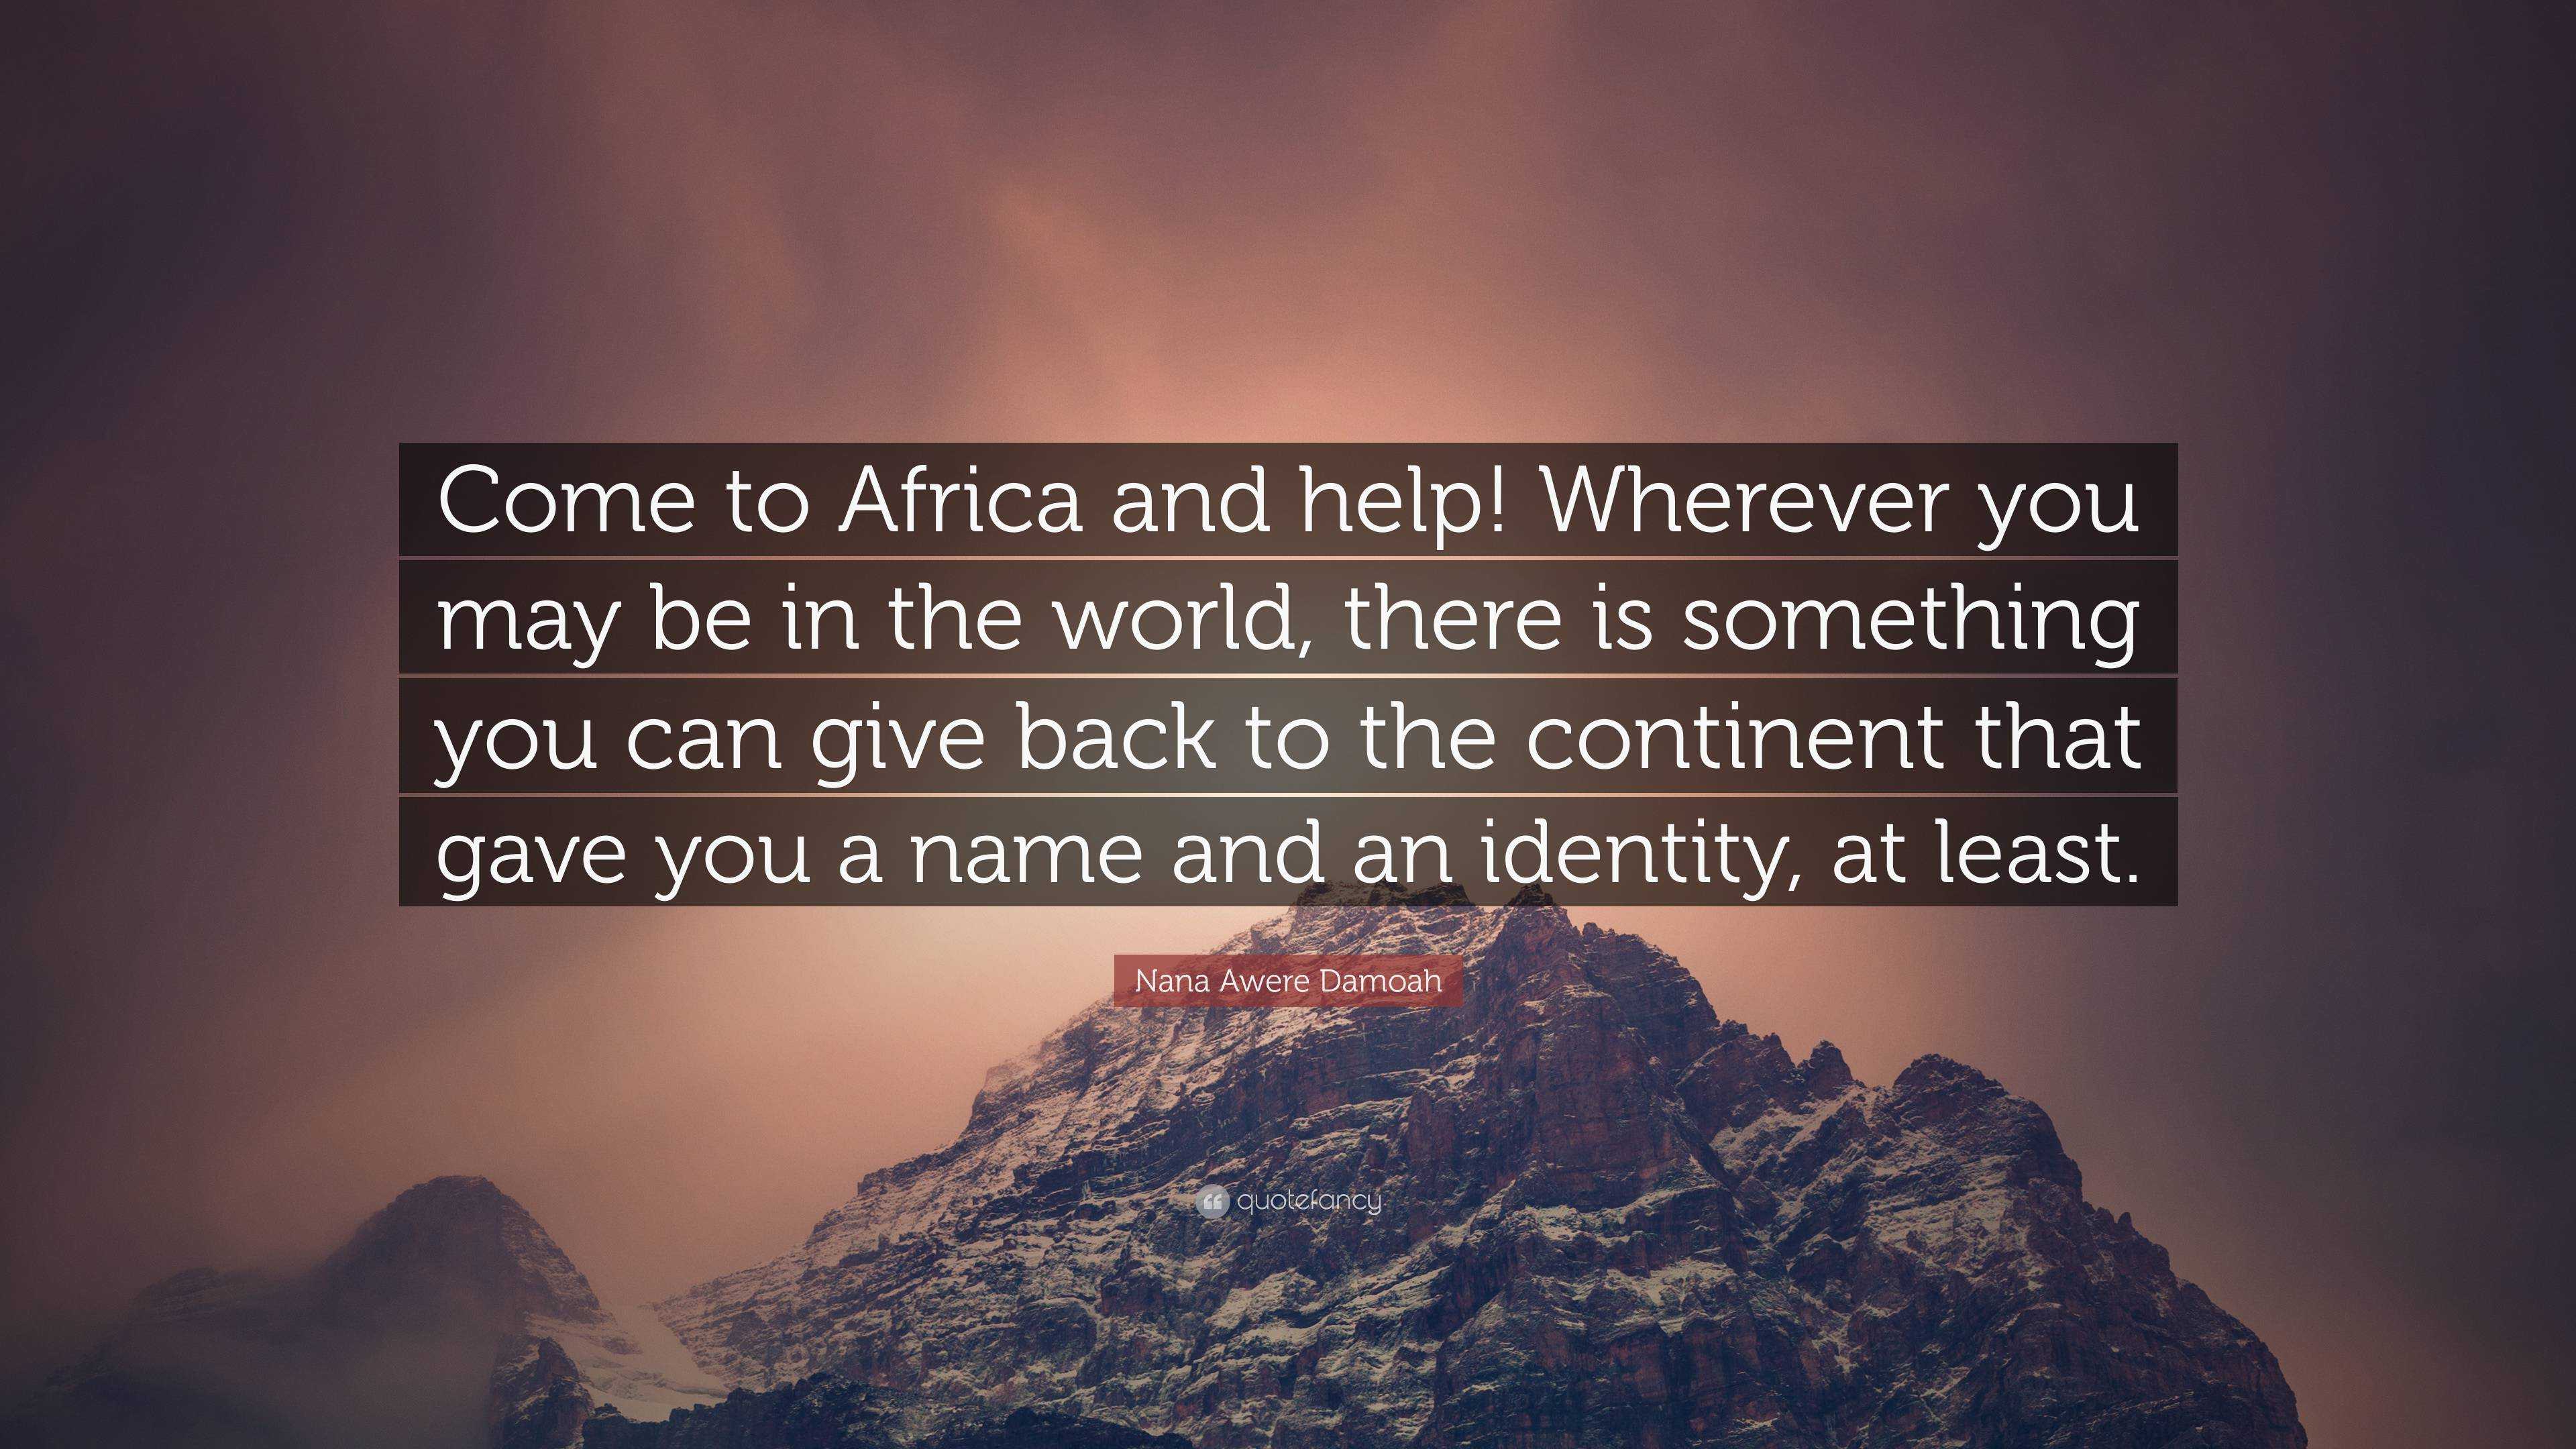 Nana Awere Damoah Quote: “Come to Africa and help! Wherever you may be in  the world, there is something you can give back to the continent that ga...”